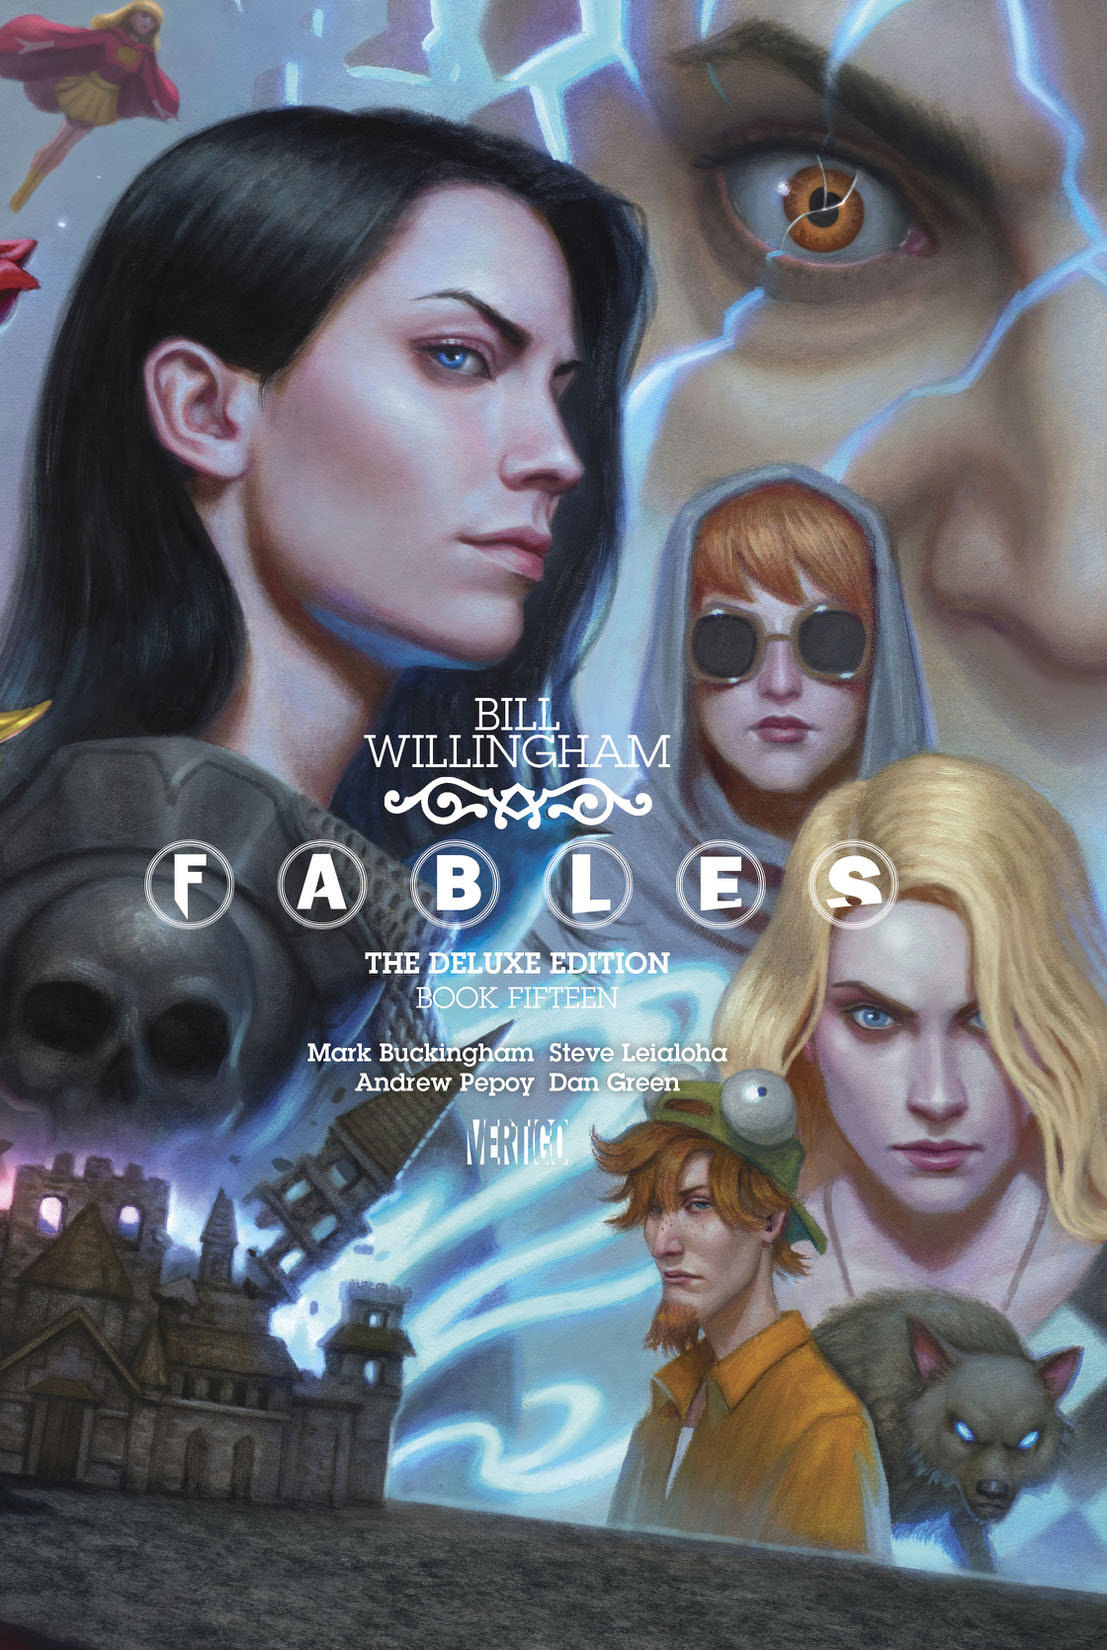 Fables: The Deluxe Edition Book Fifteen preview images